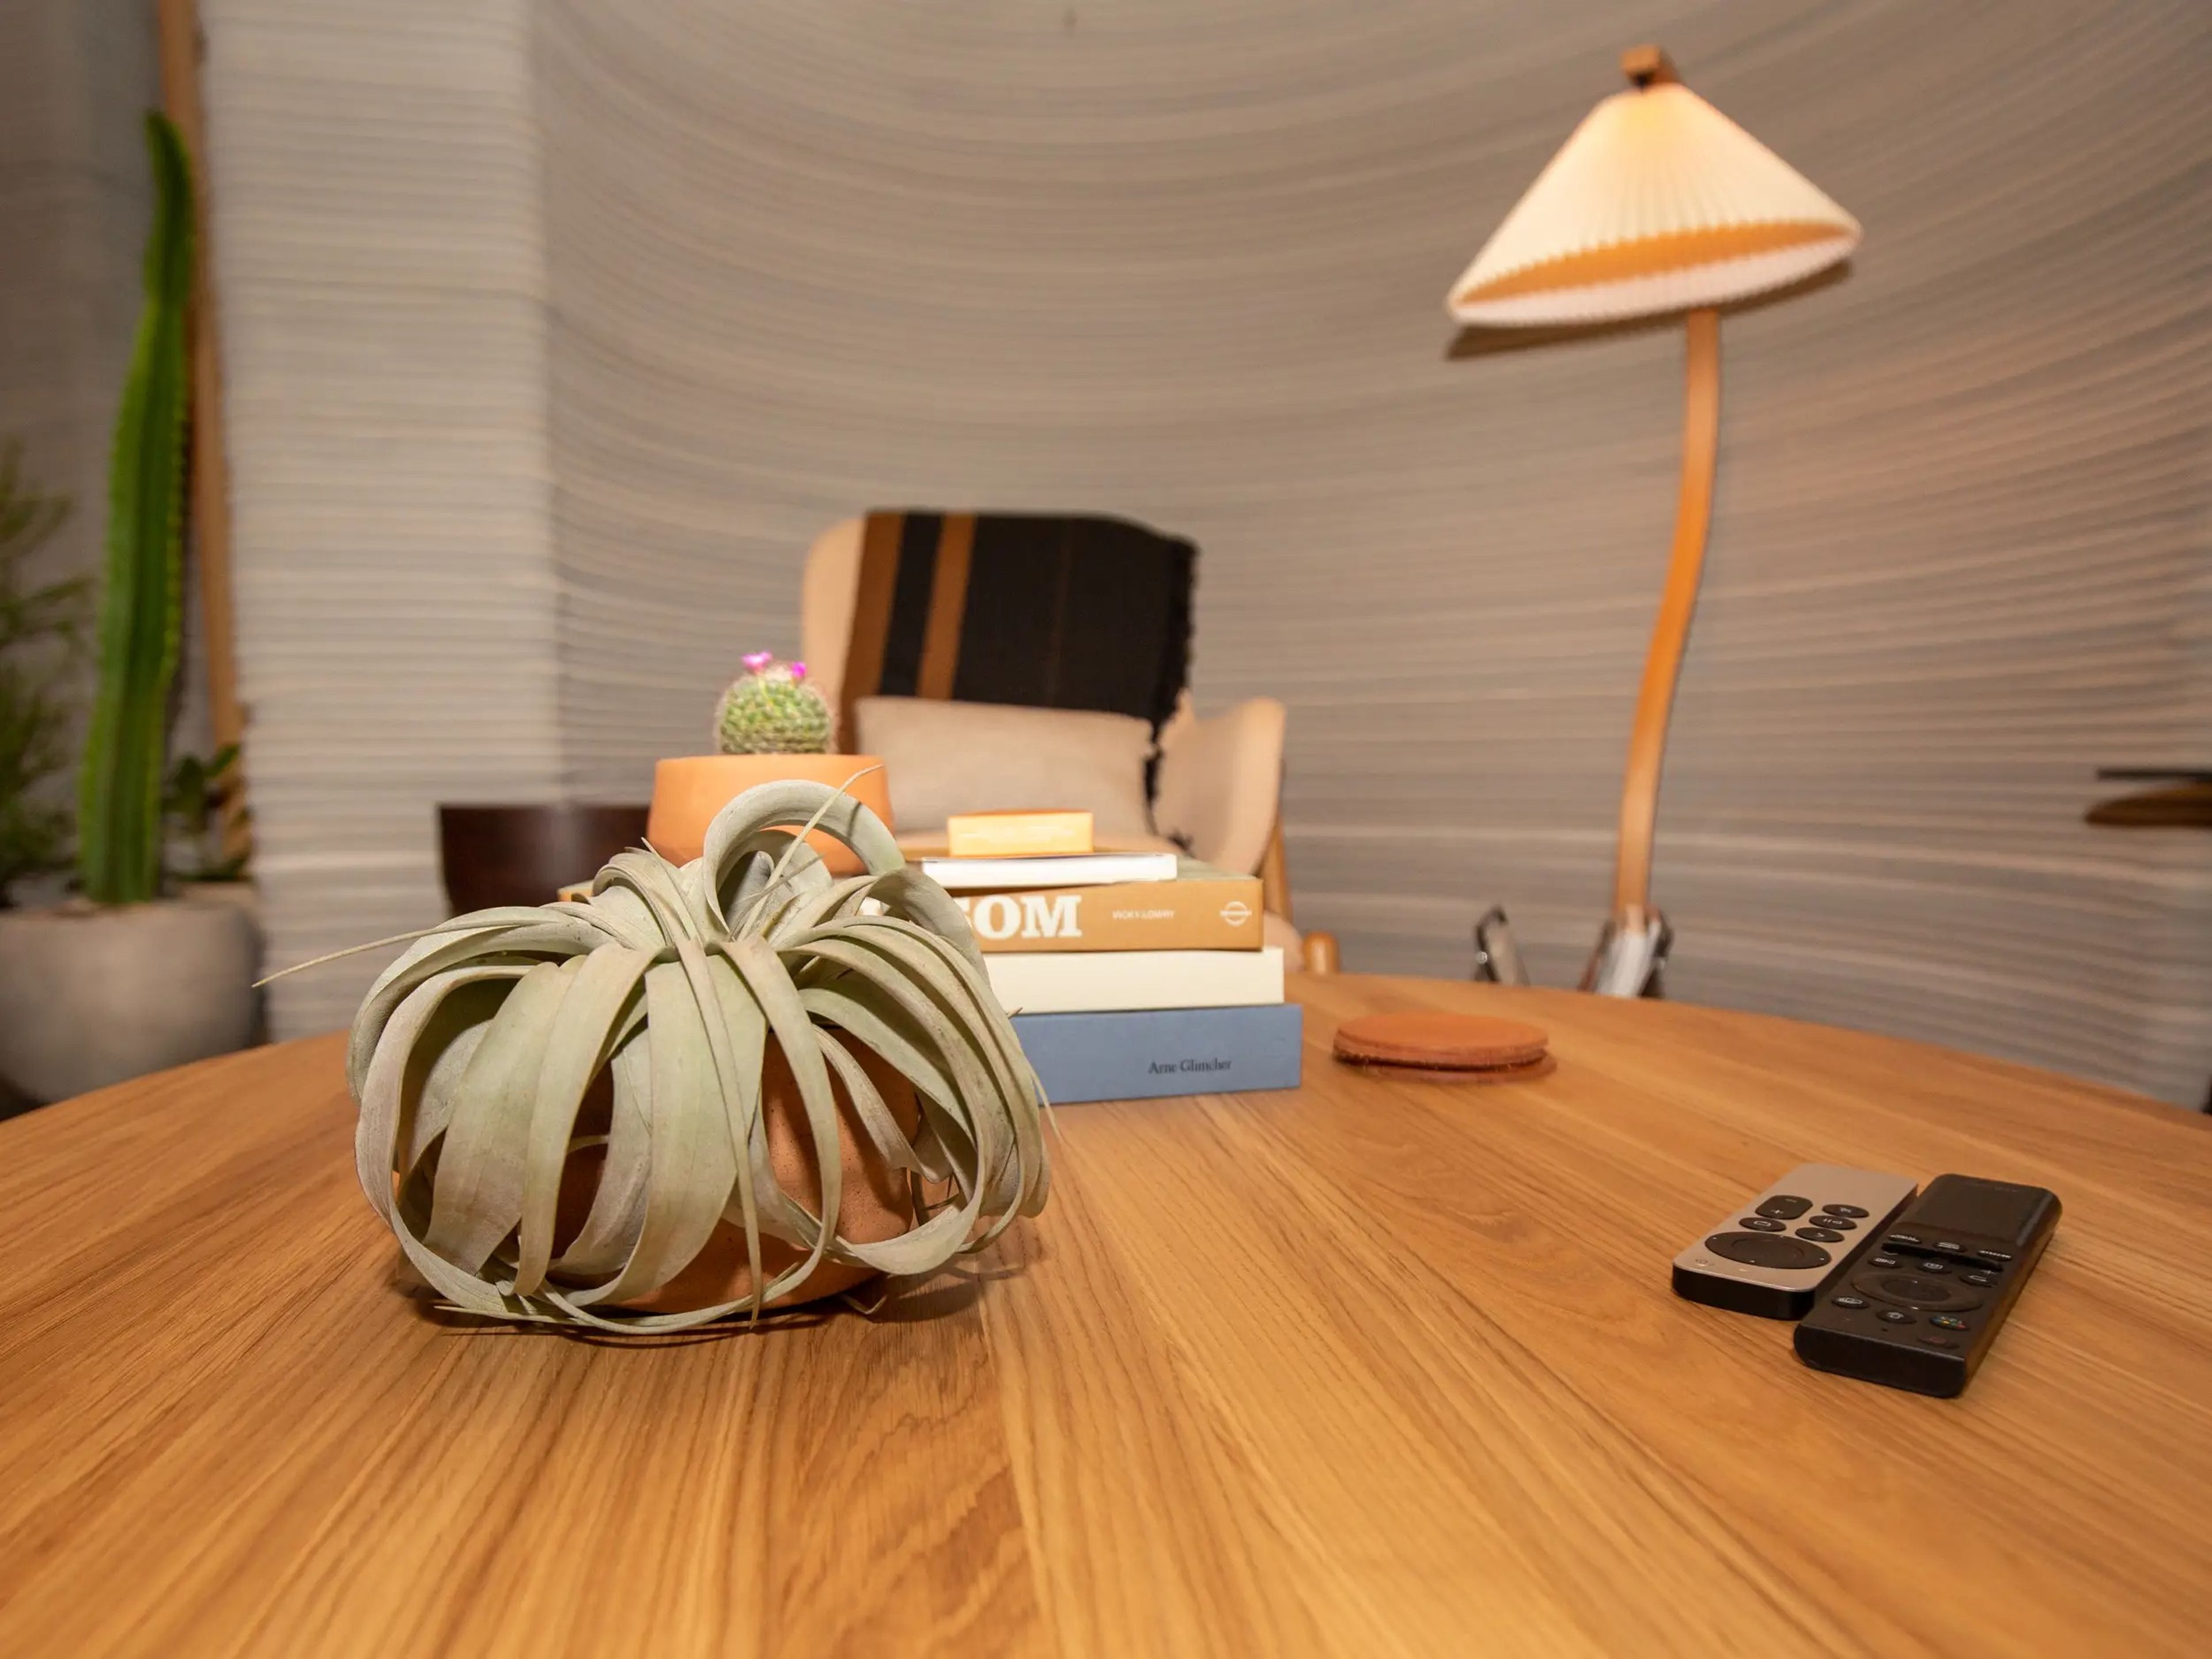 The living room inside the 3D printed home with lounge chairs, a rug, plants, and lights.